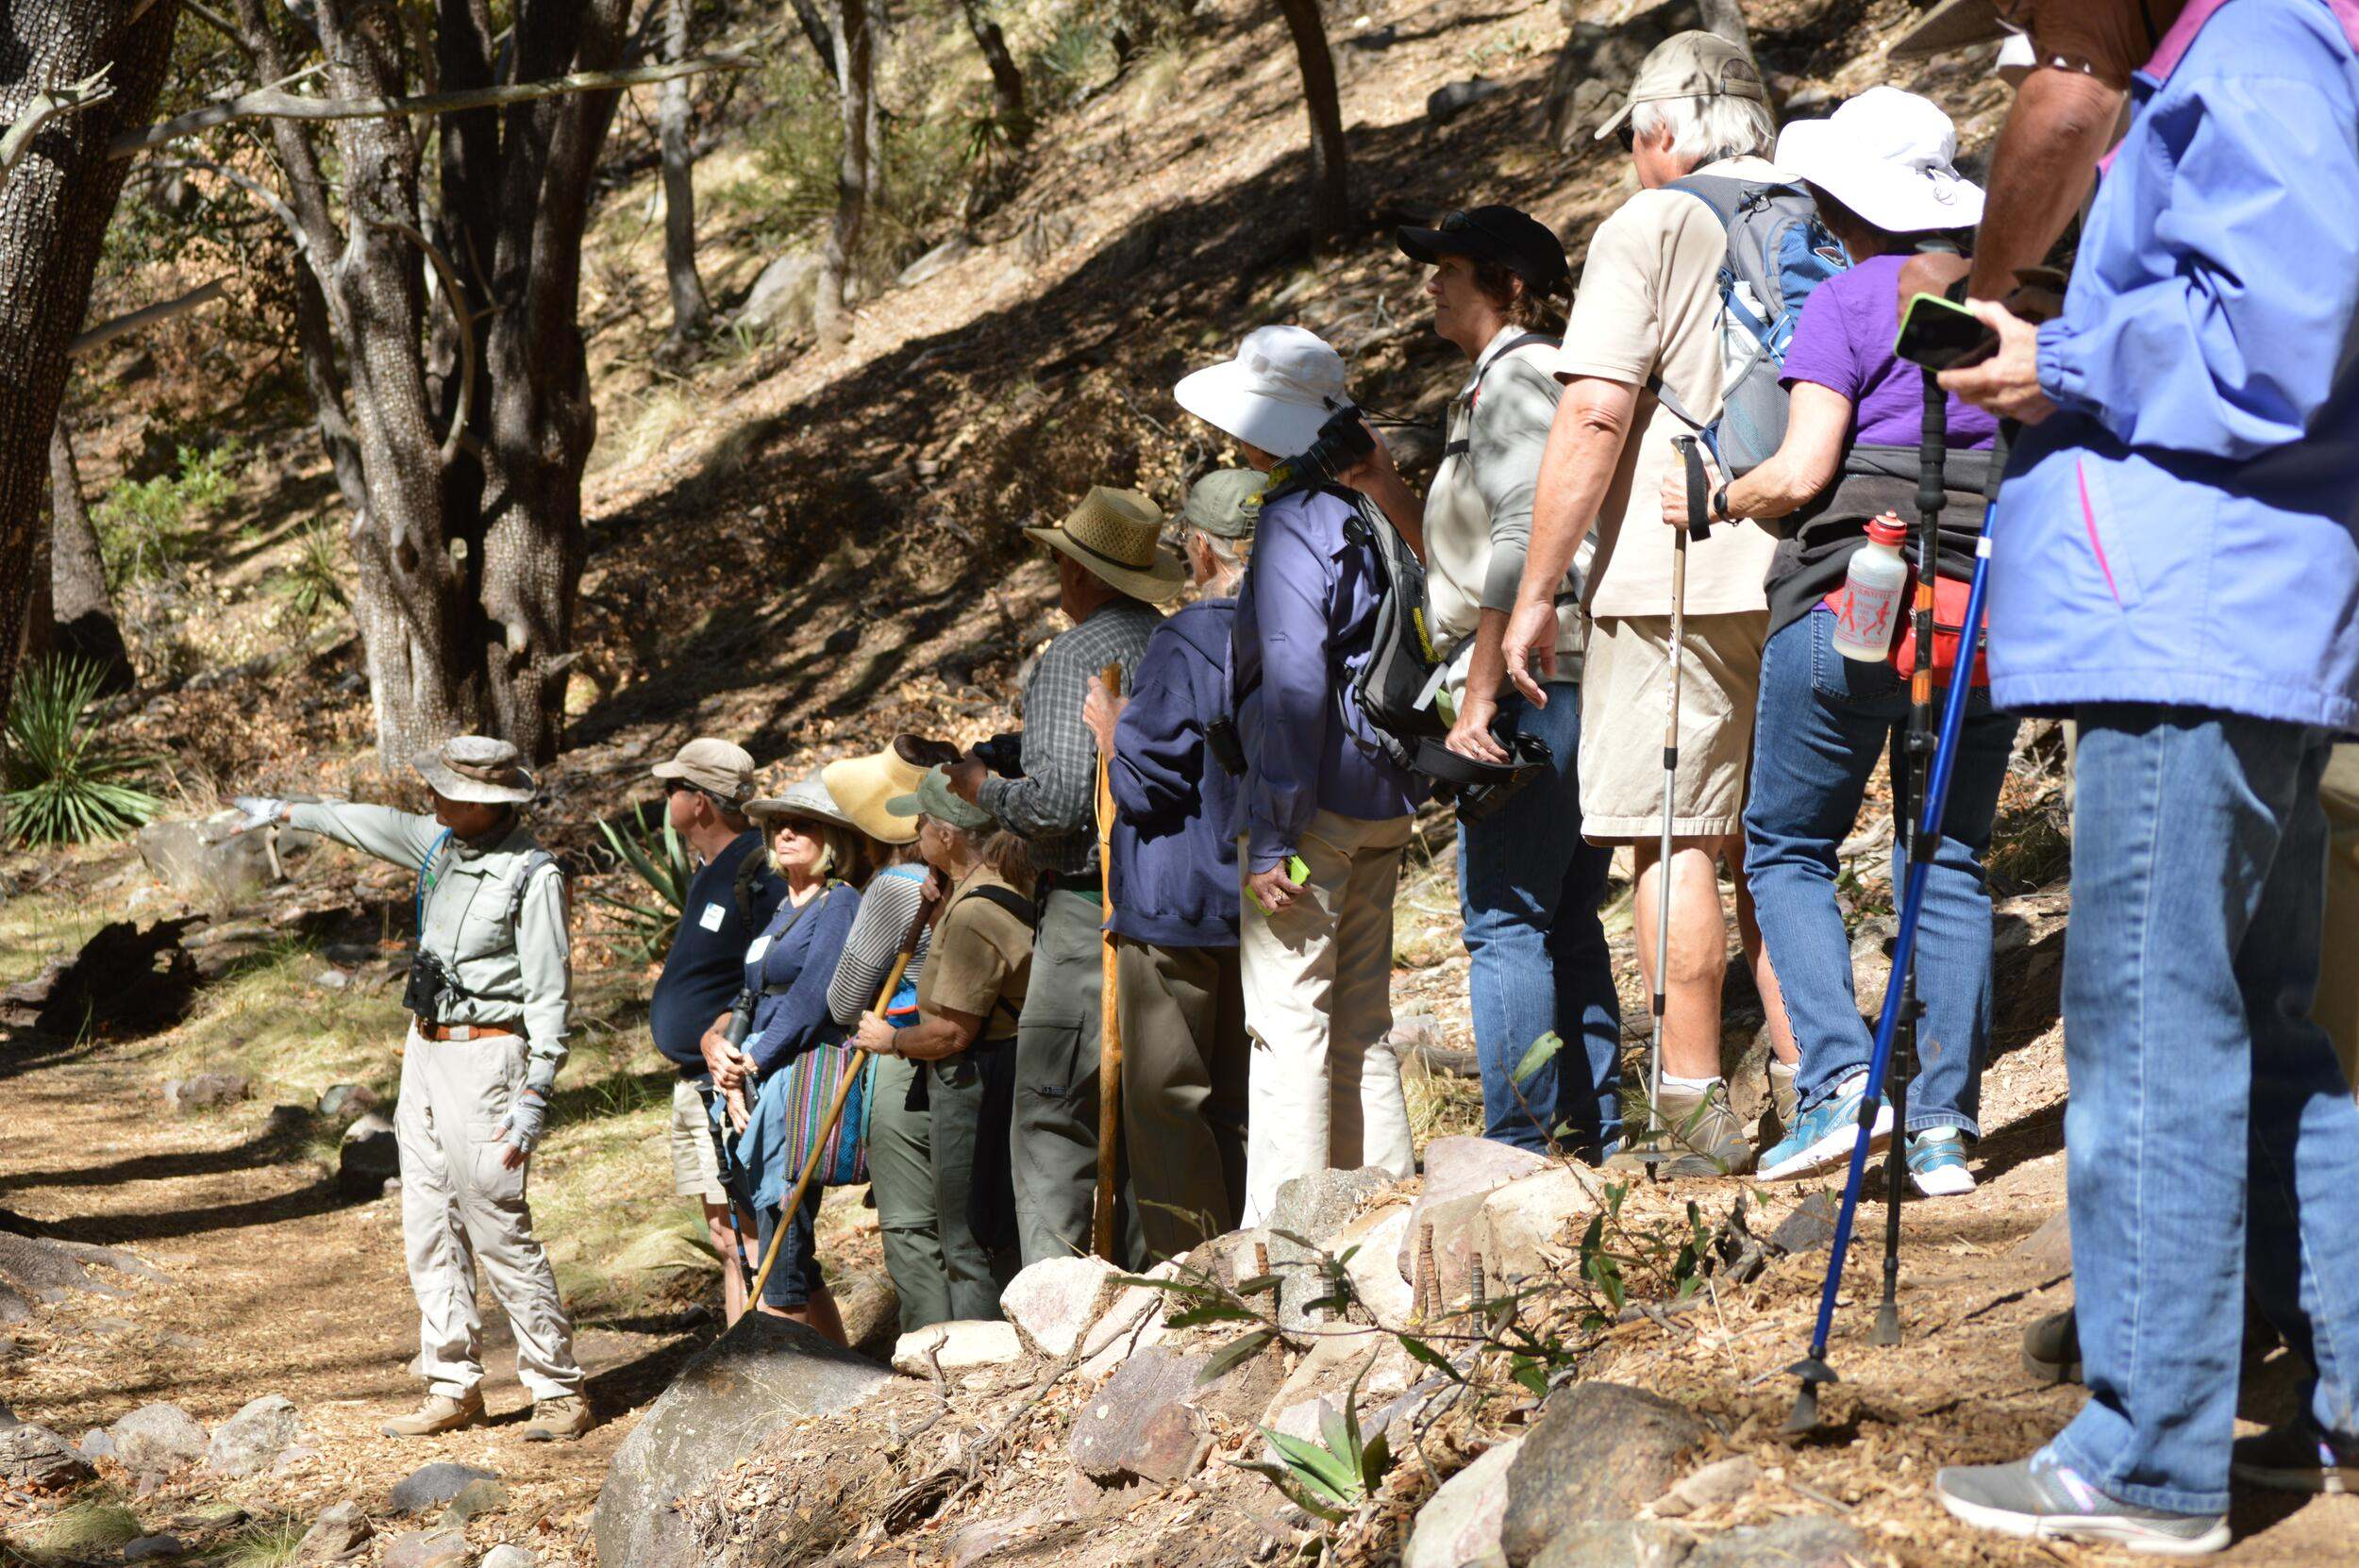 A group a hikers stand in a single-file line with the guide points in the direction ahead.